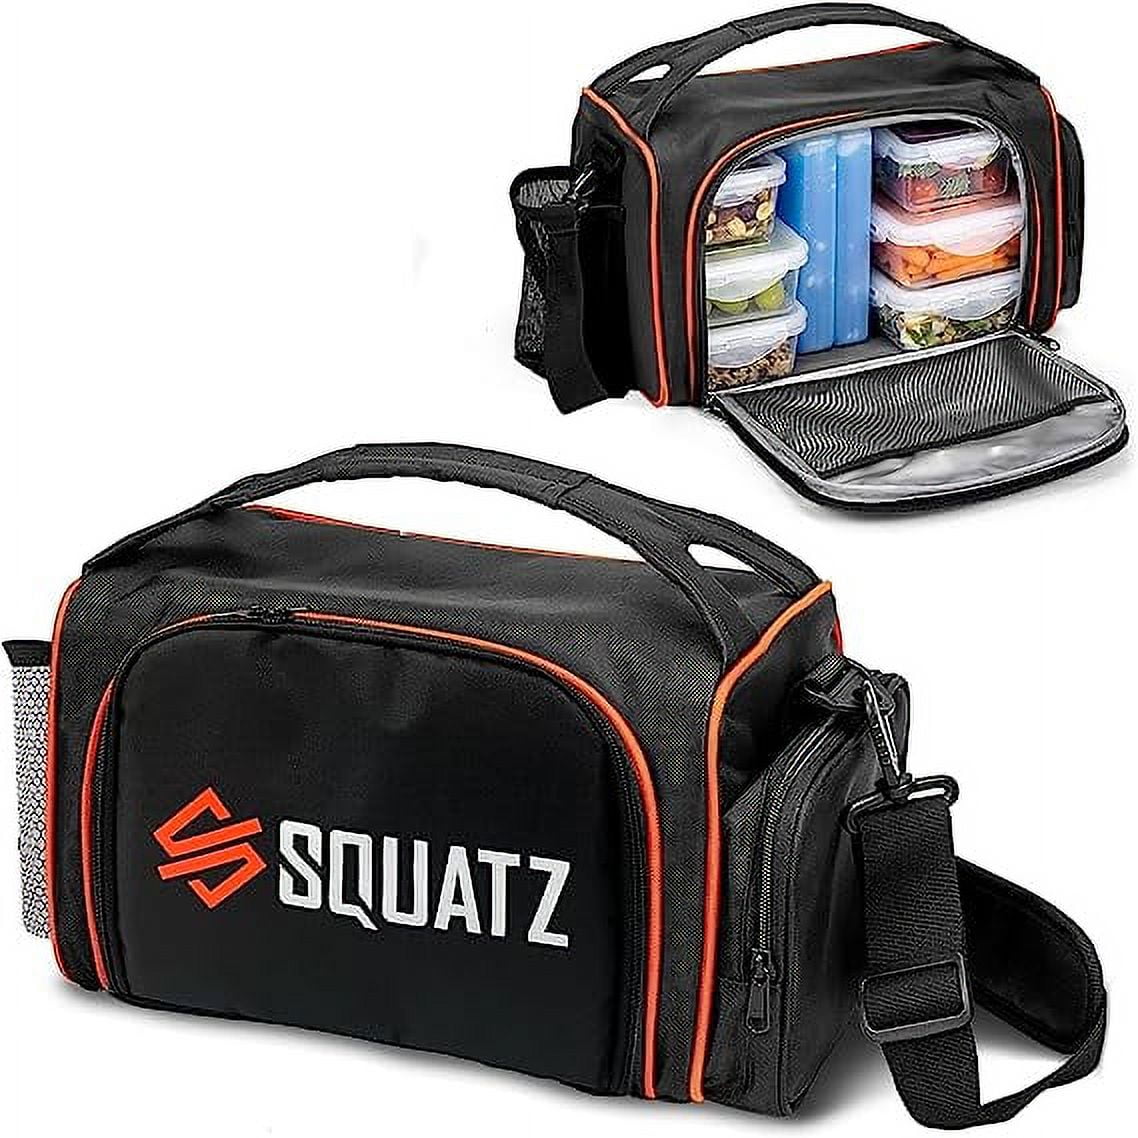 Squatz Insulated Meal Prep Lbs Lunch Double Container 13 Heavy Capacity Insulation Maximum Duty Bag